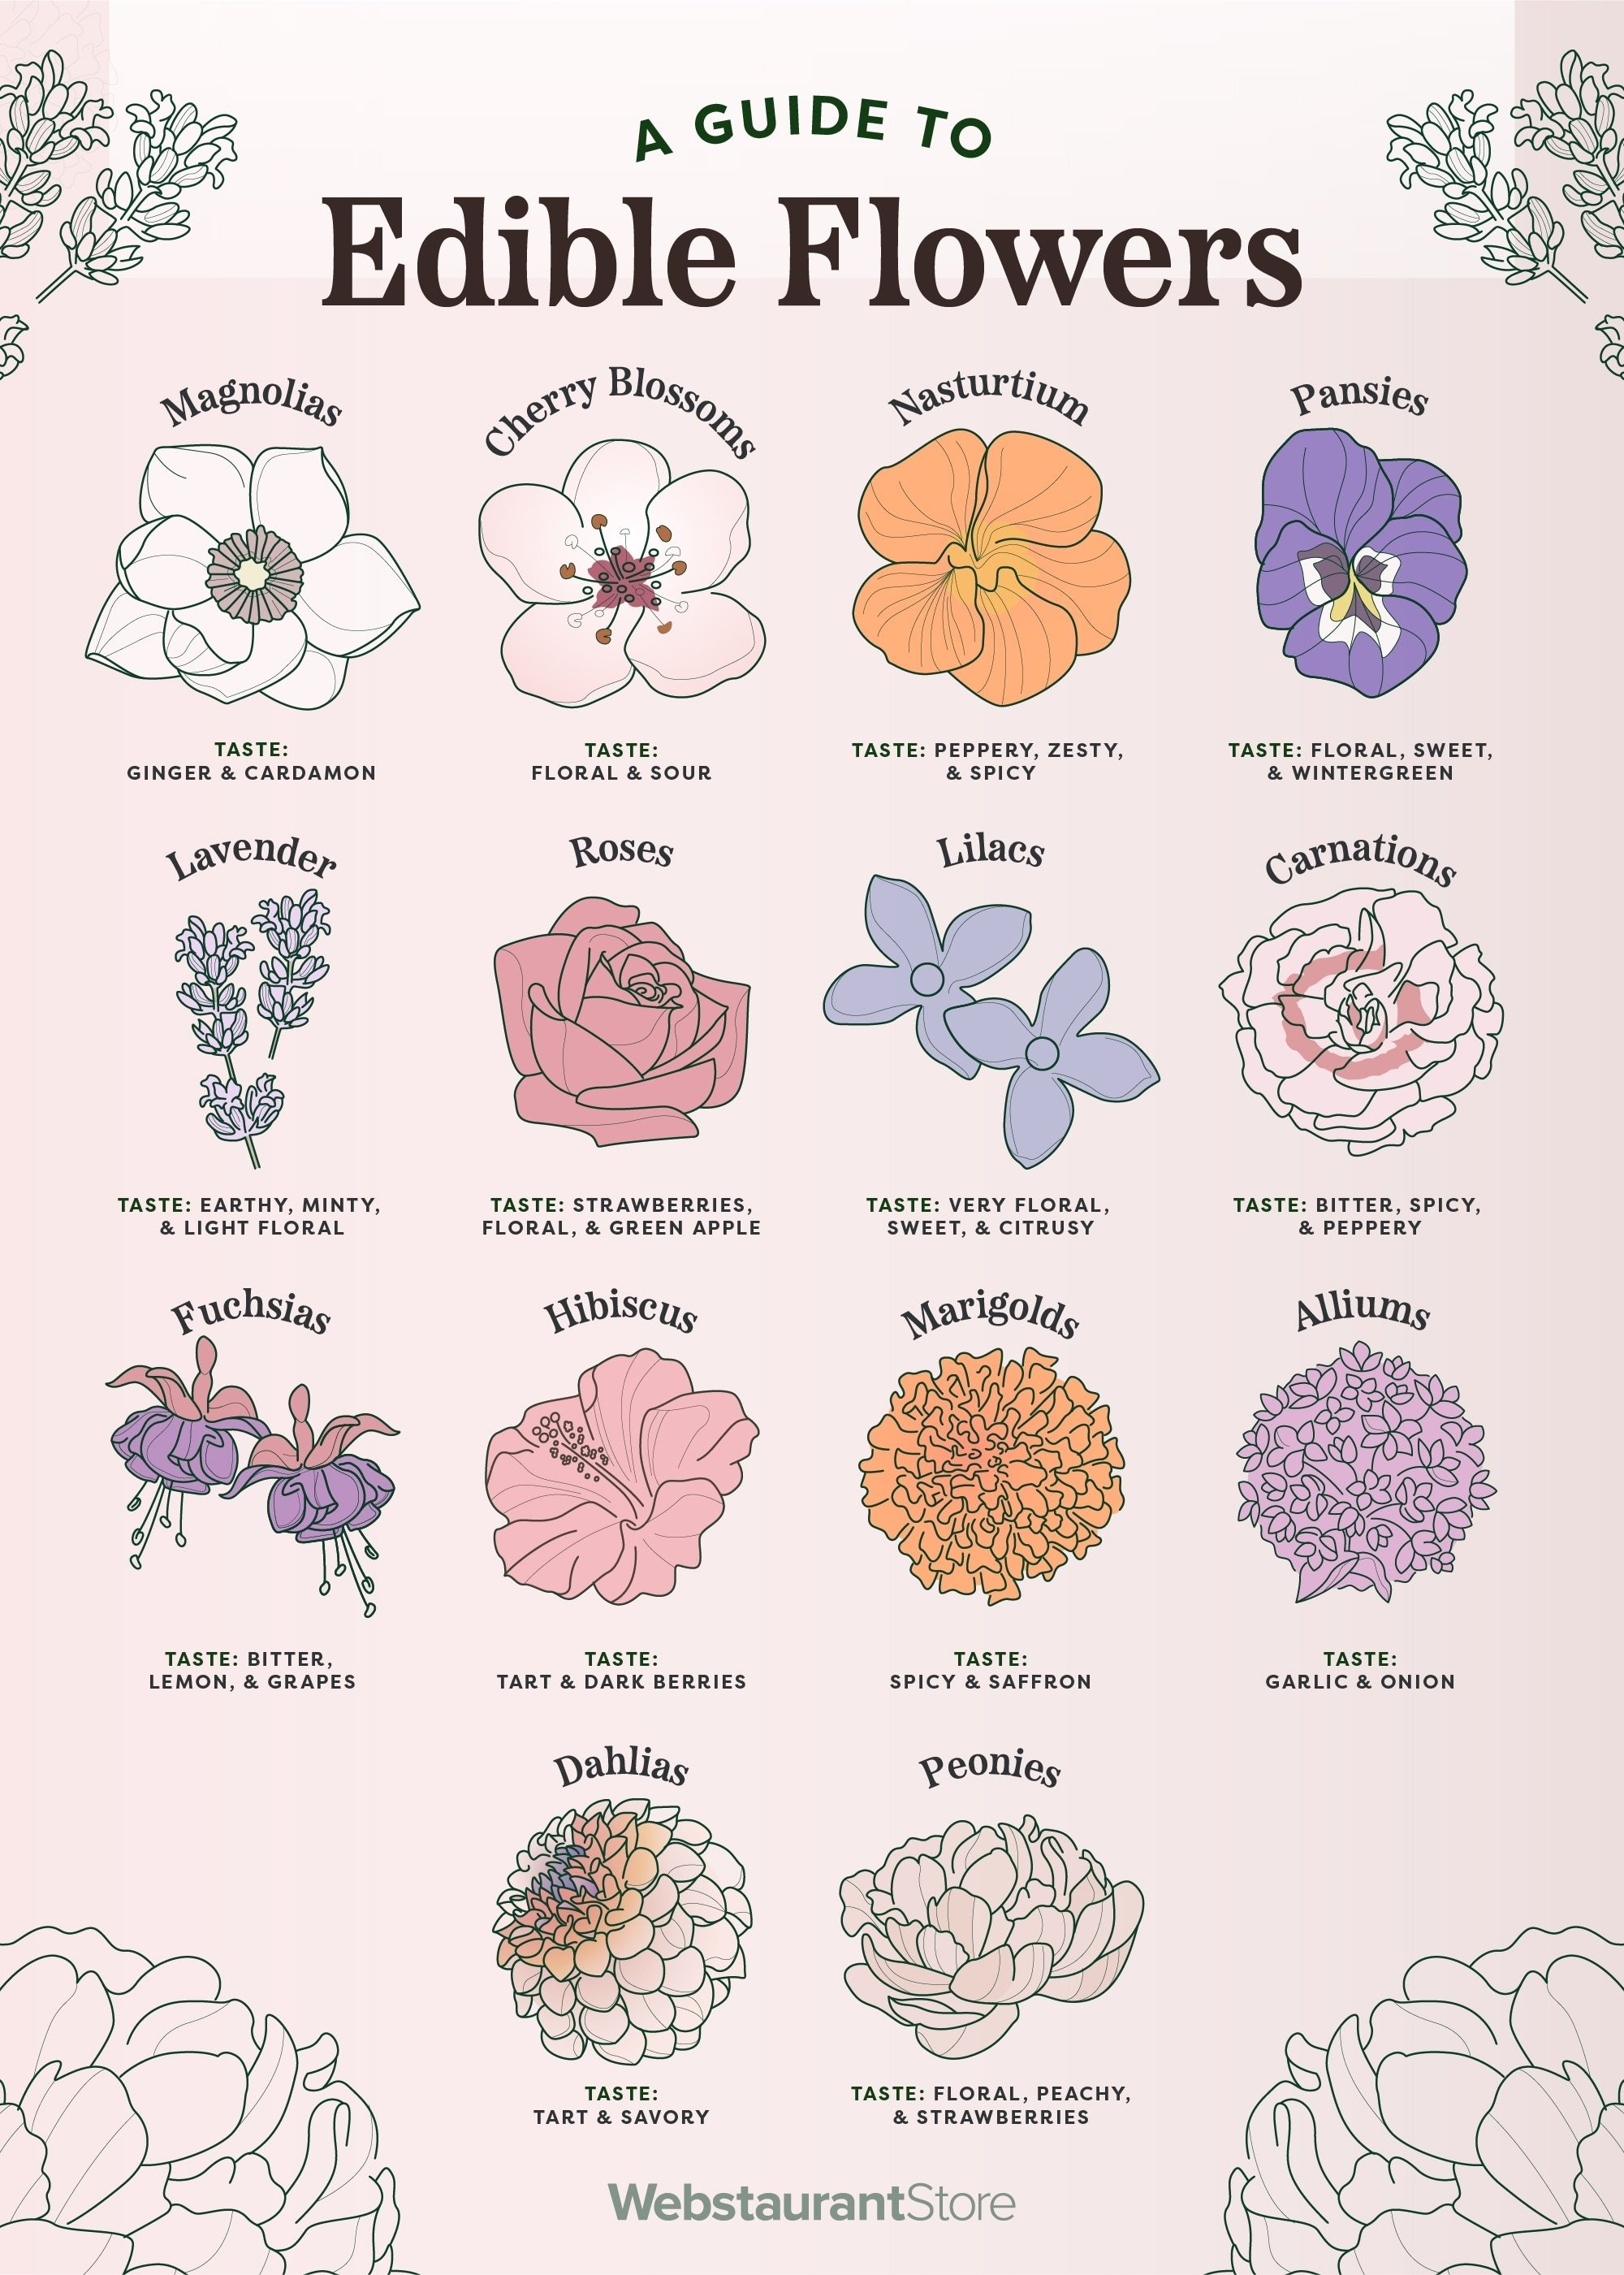 Guide to Edible Flowers: Which Types of Flowers are Edible